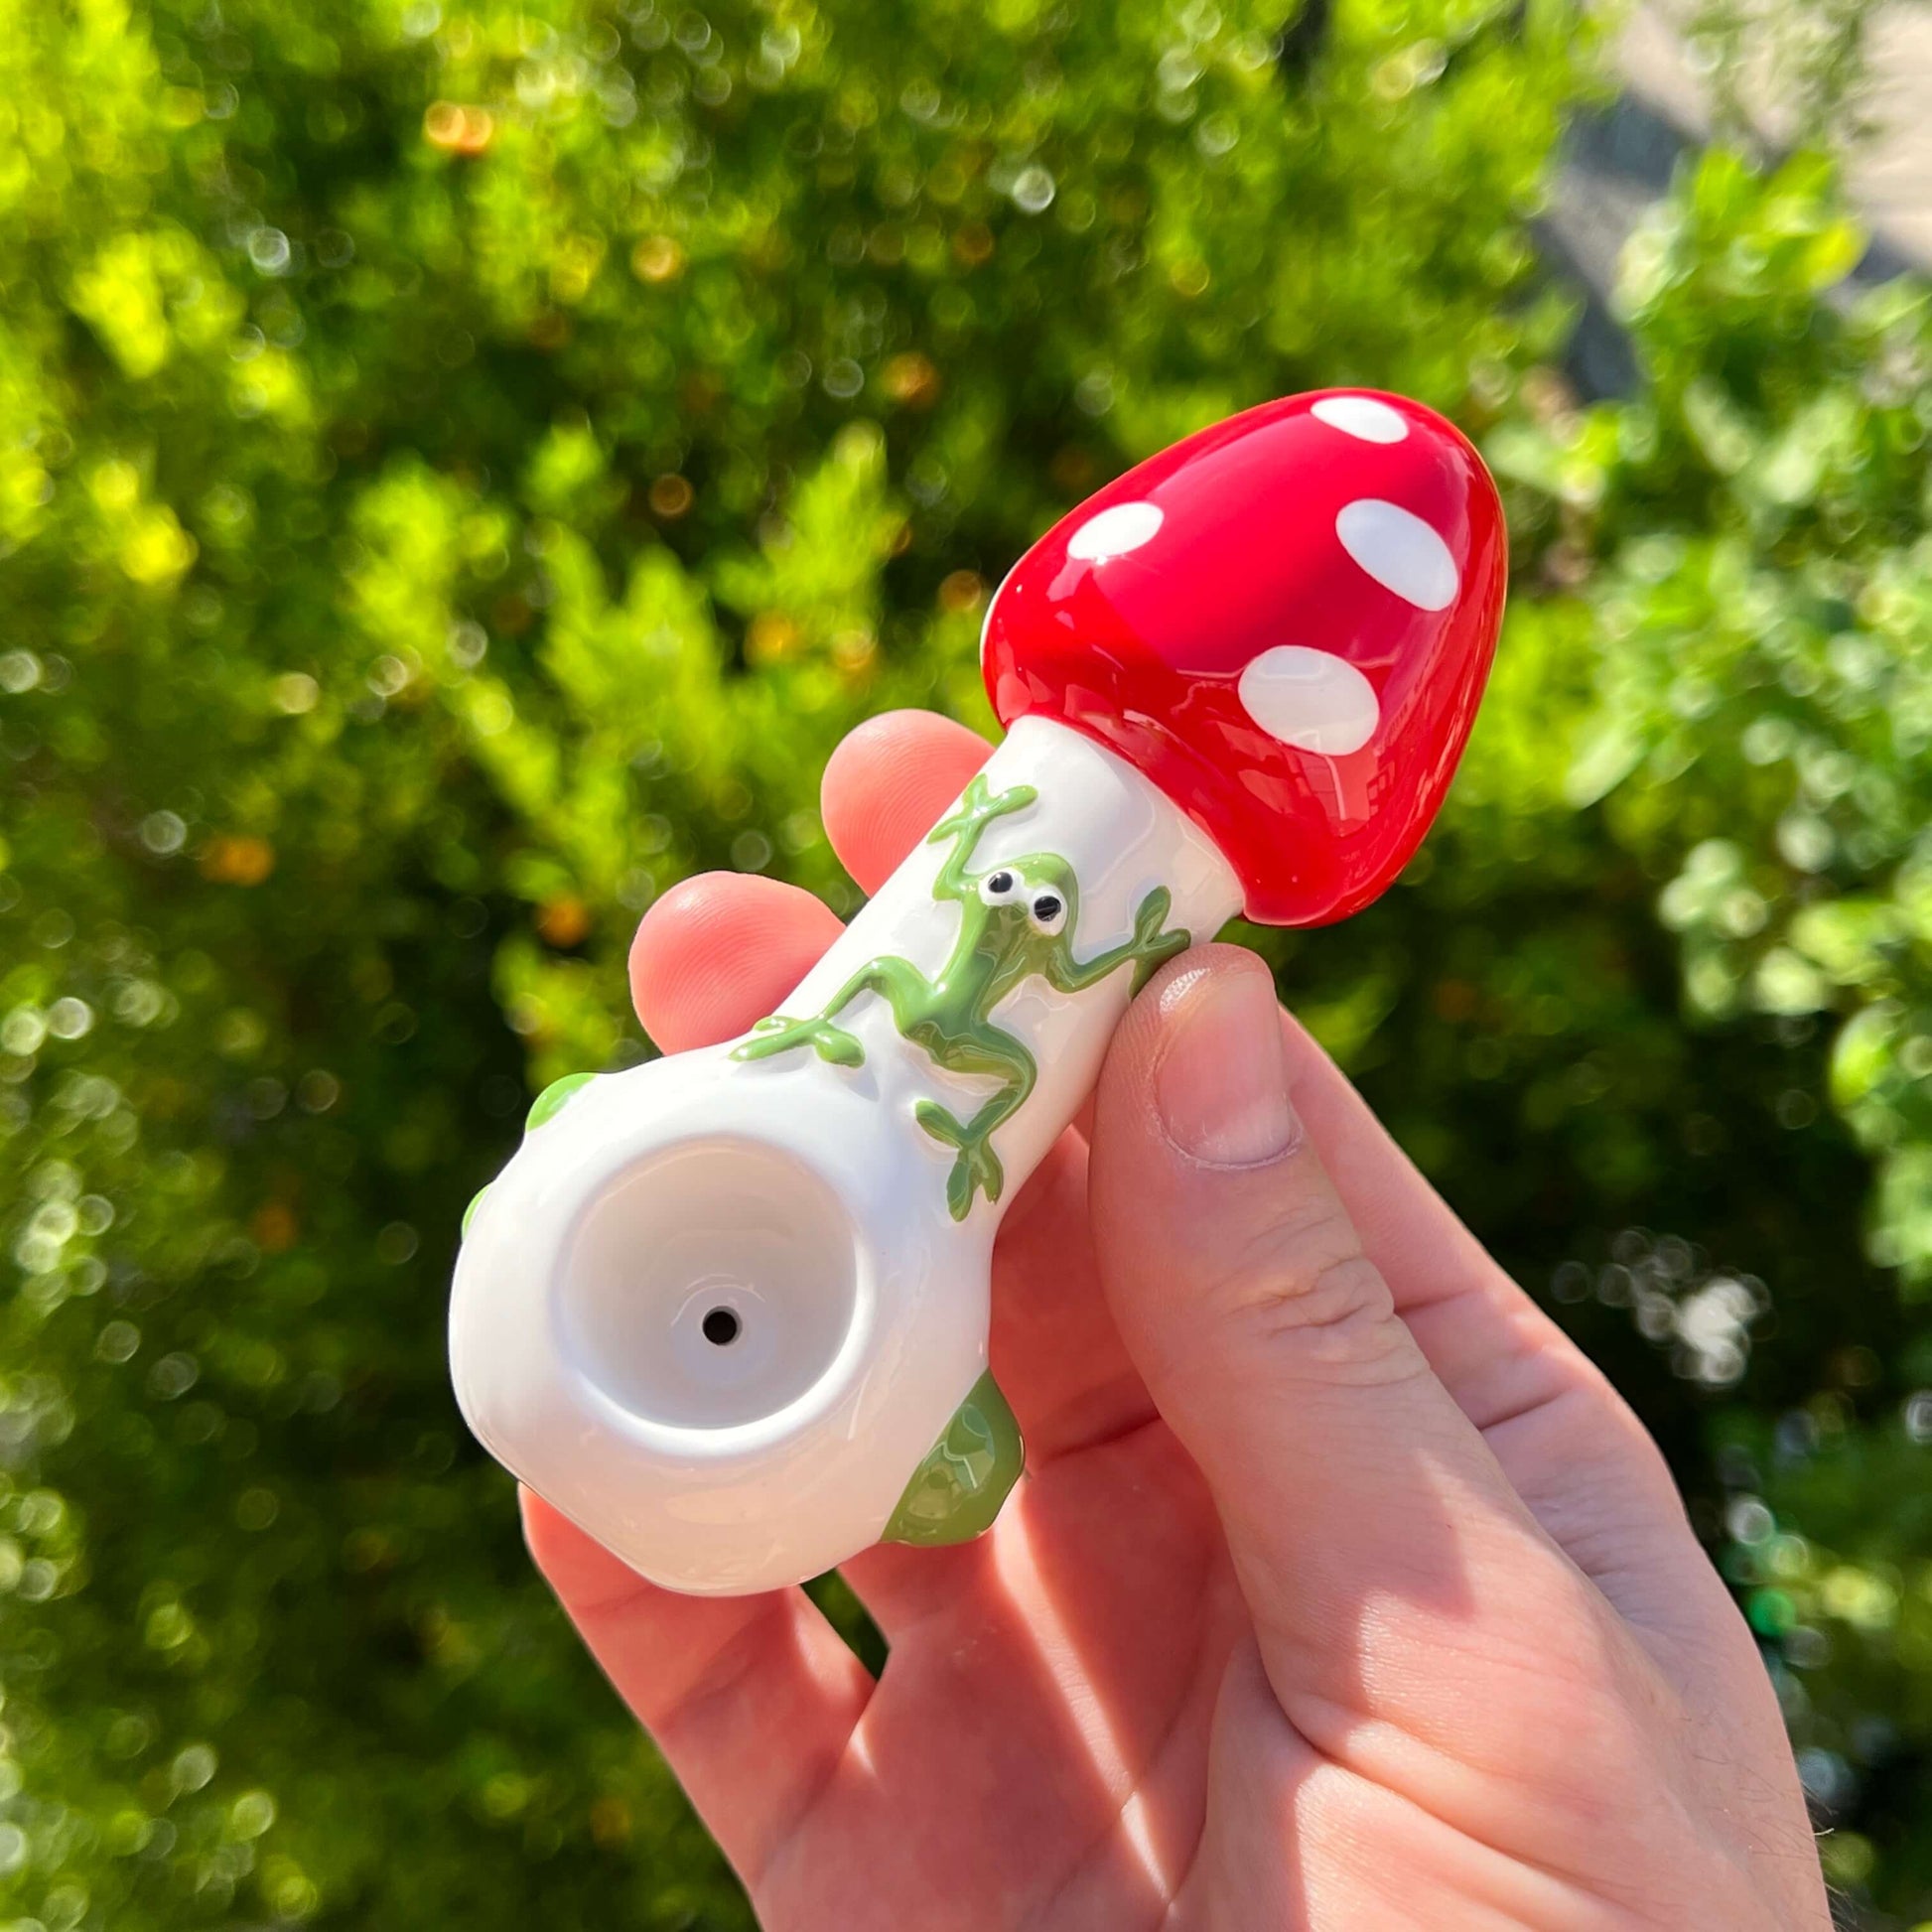 Cool Pipes For Your Stoner Friend